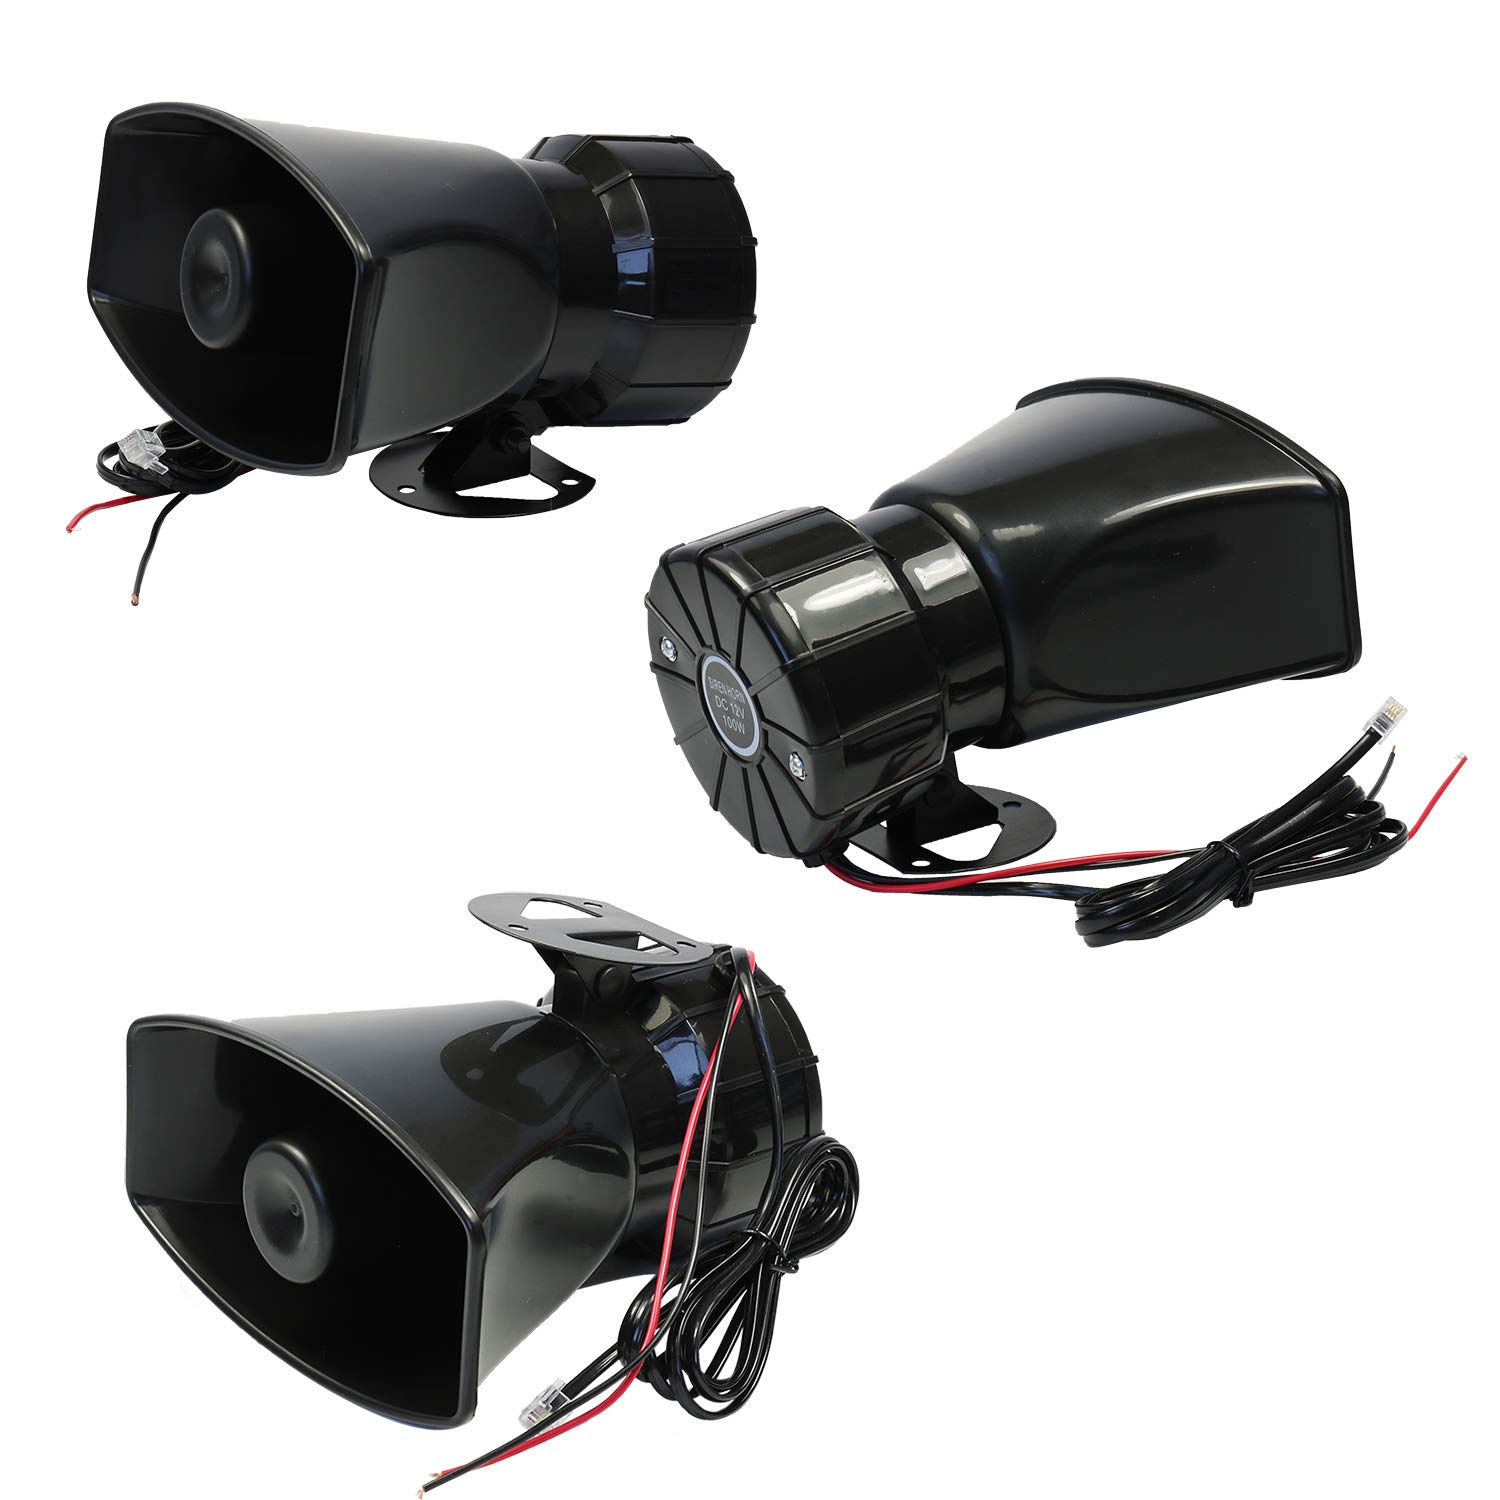 Car Siren Horn 7 Tone Sound Siren Police Mic PA Speaker Car System Emergency with Microphone Amplifier-100W Emergency Sound Electric Horn-12V